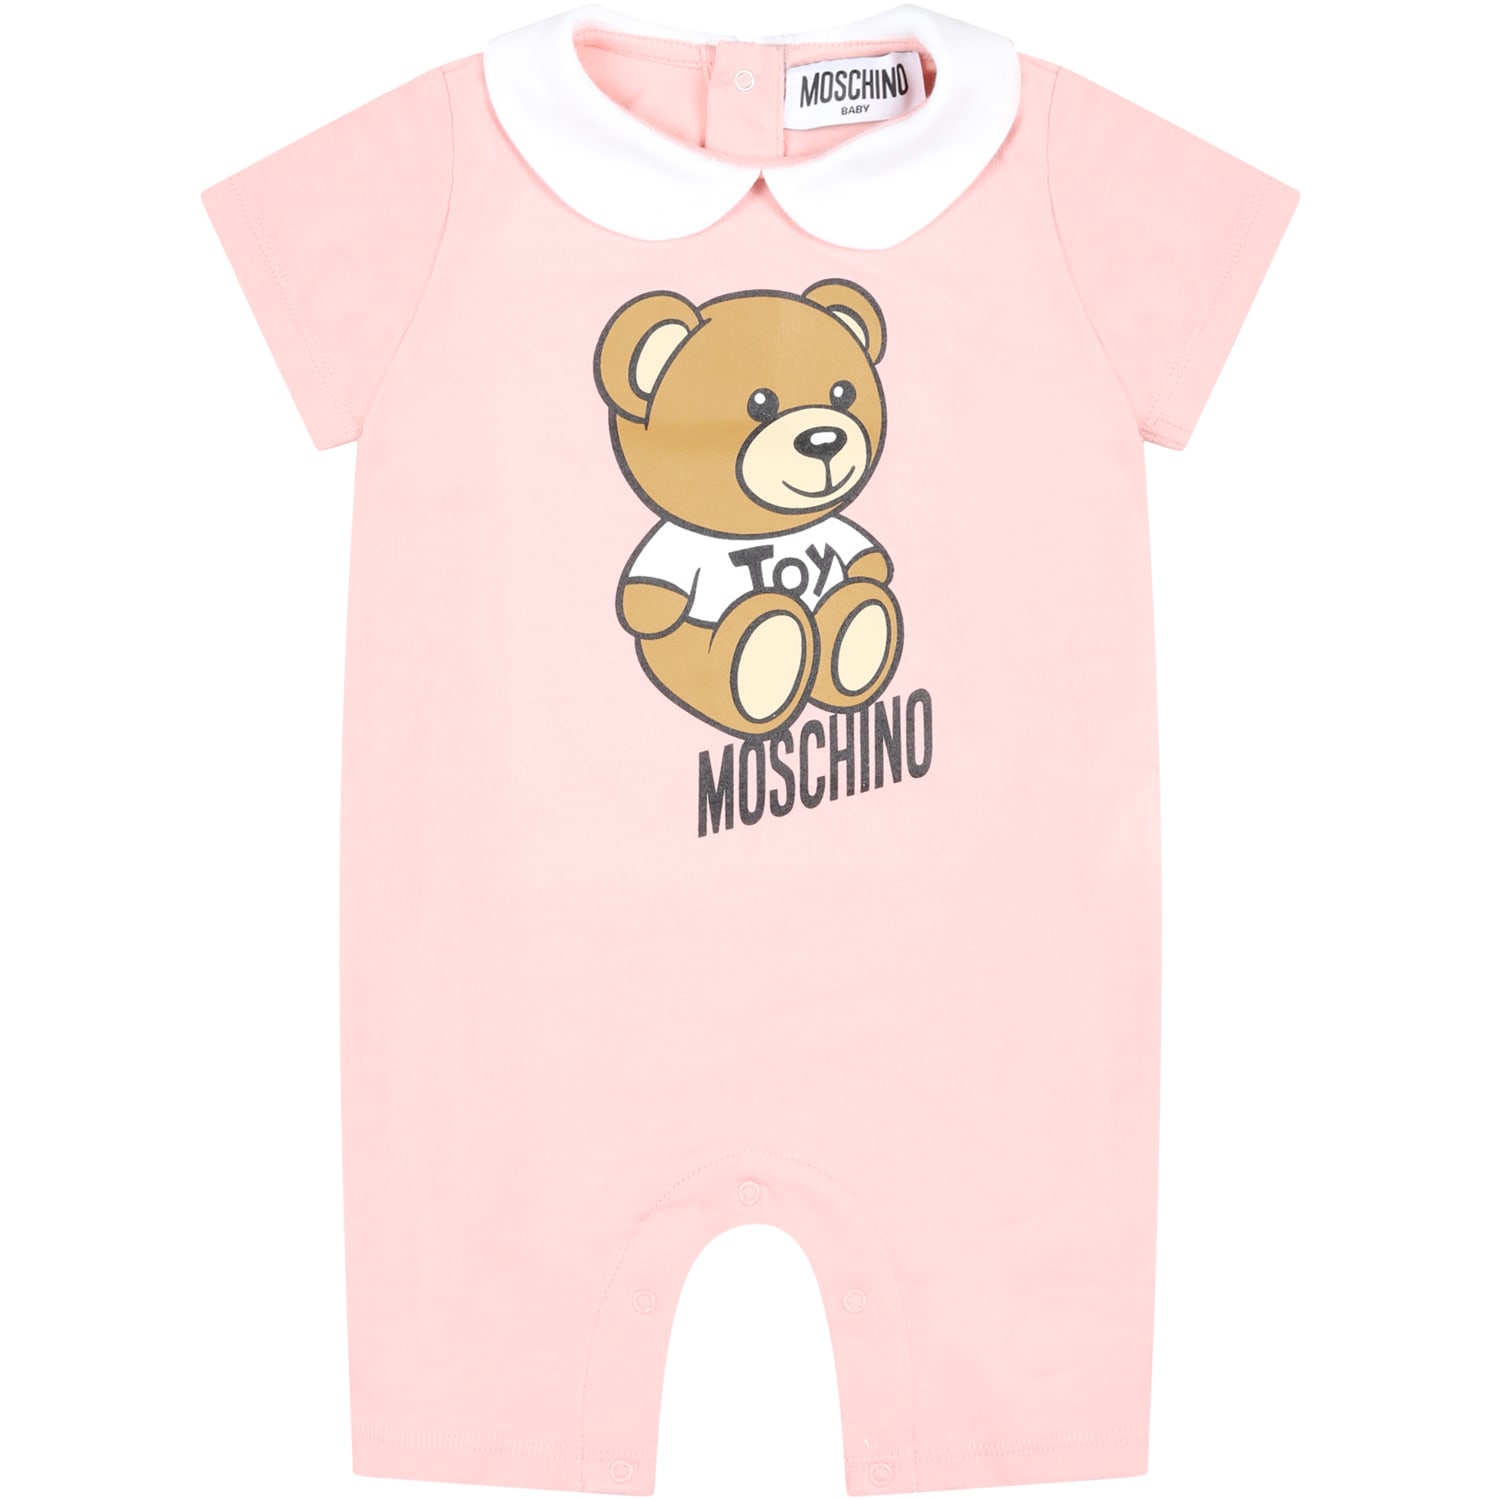 MOSCHINO PINK ROMPER FOR BABY GIRL WITH TEDDY BEAR